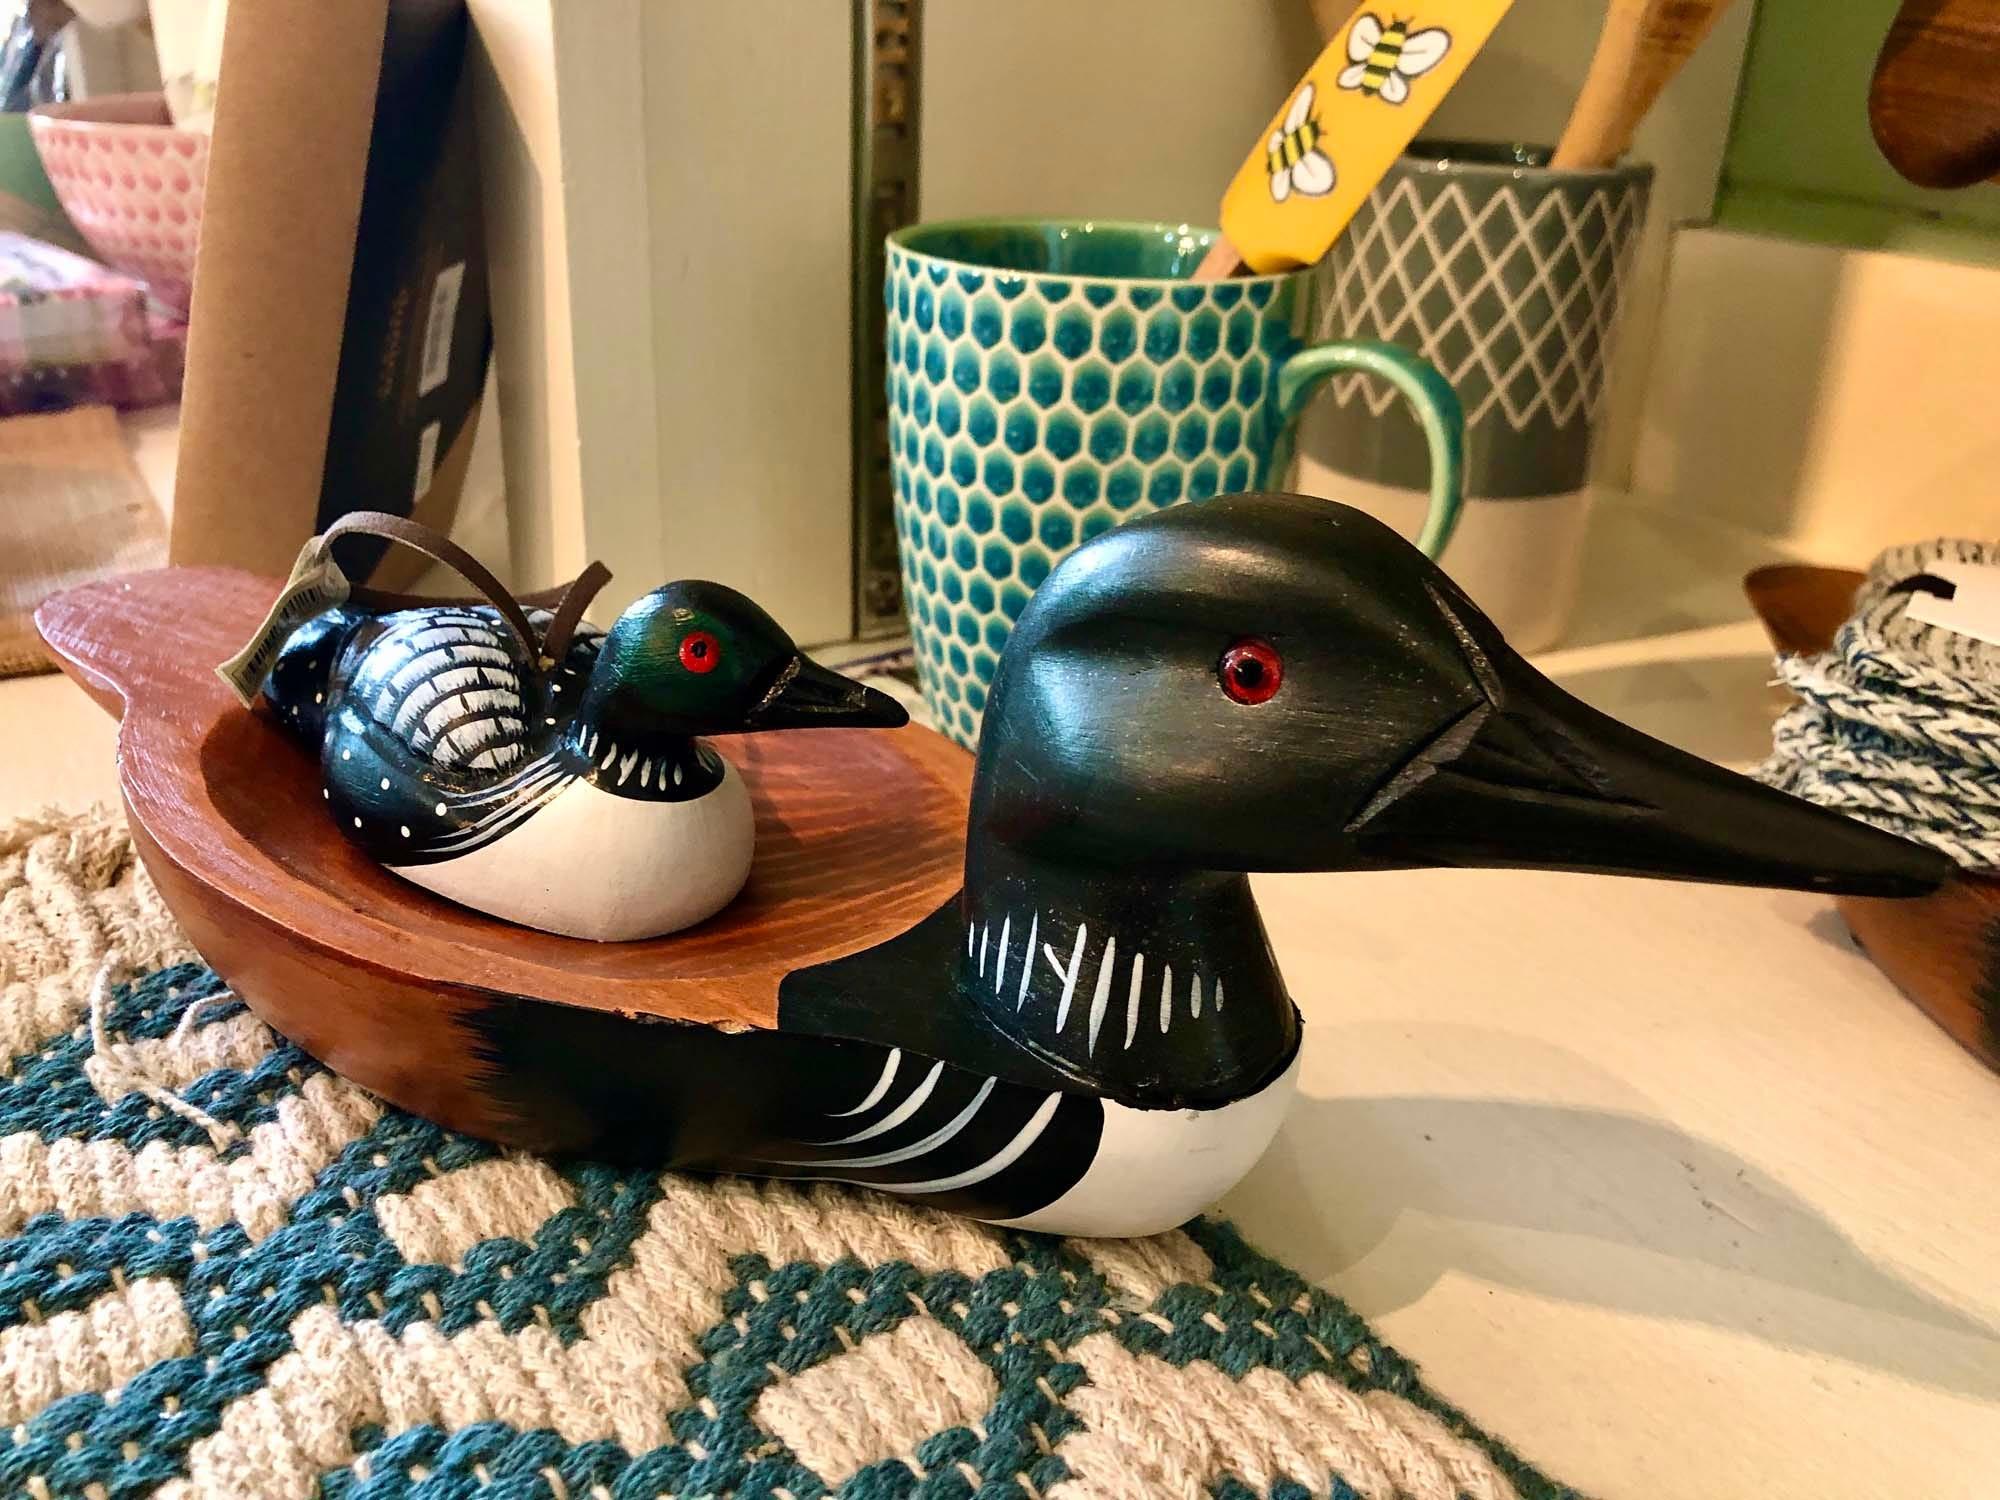 The Squam Lake Marketplace has gifts. The Common Loon is a spectacular looking water bird with black and white feathering and piercing red eyes.